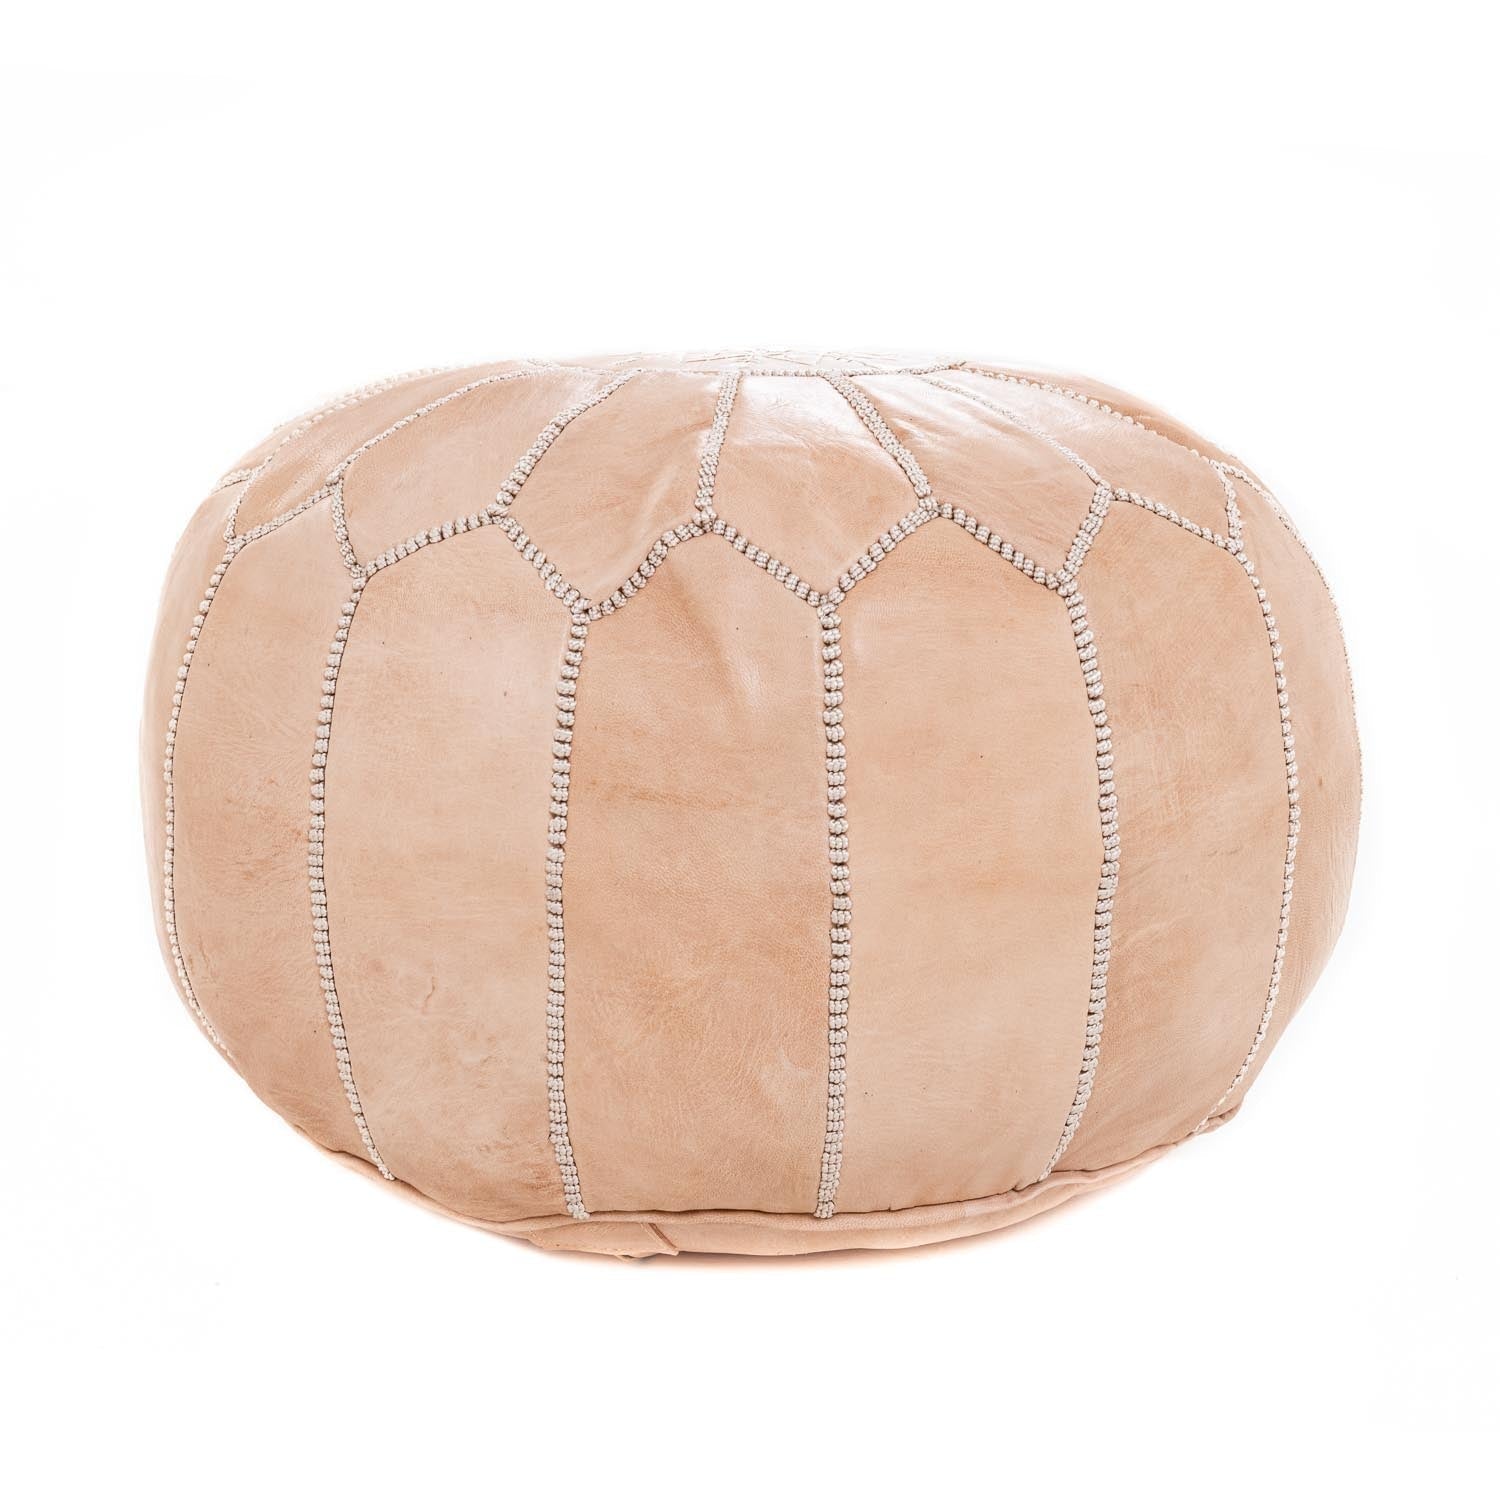 Authentic Moroccan Leather Pouf - Nude - Benisouk